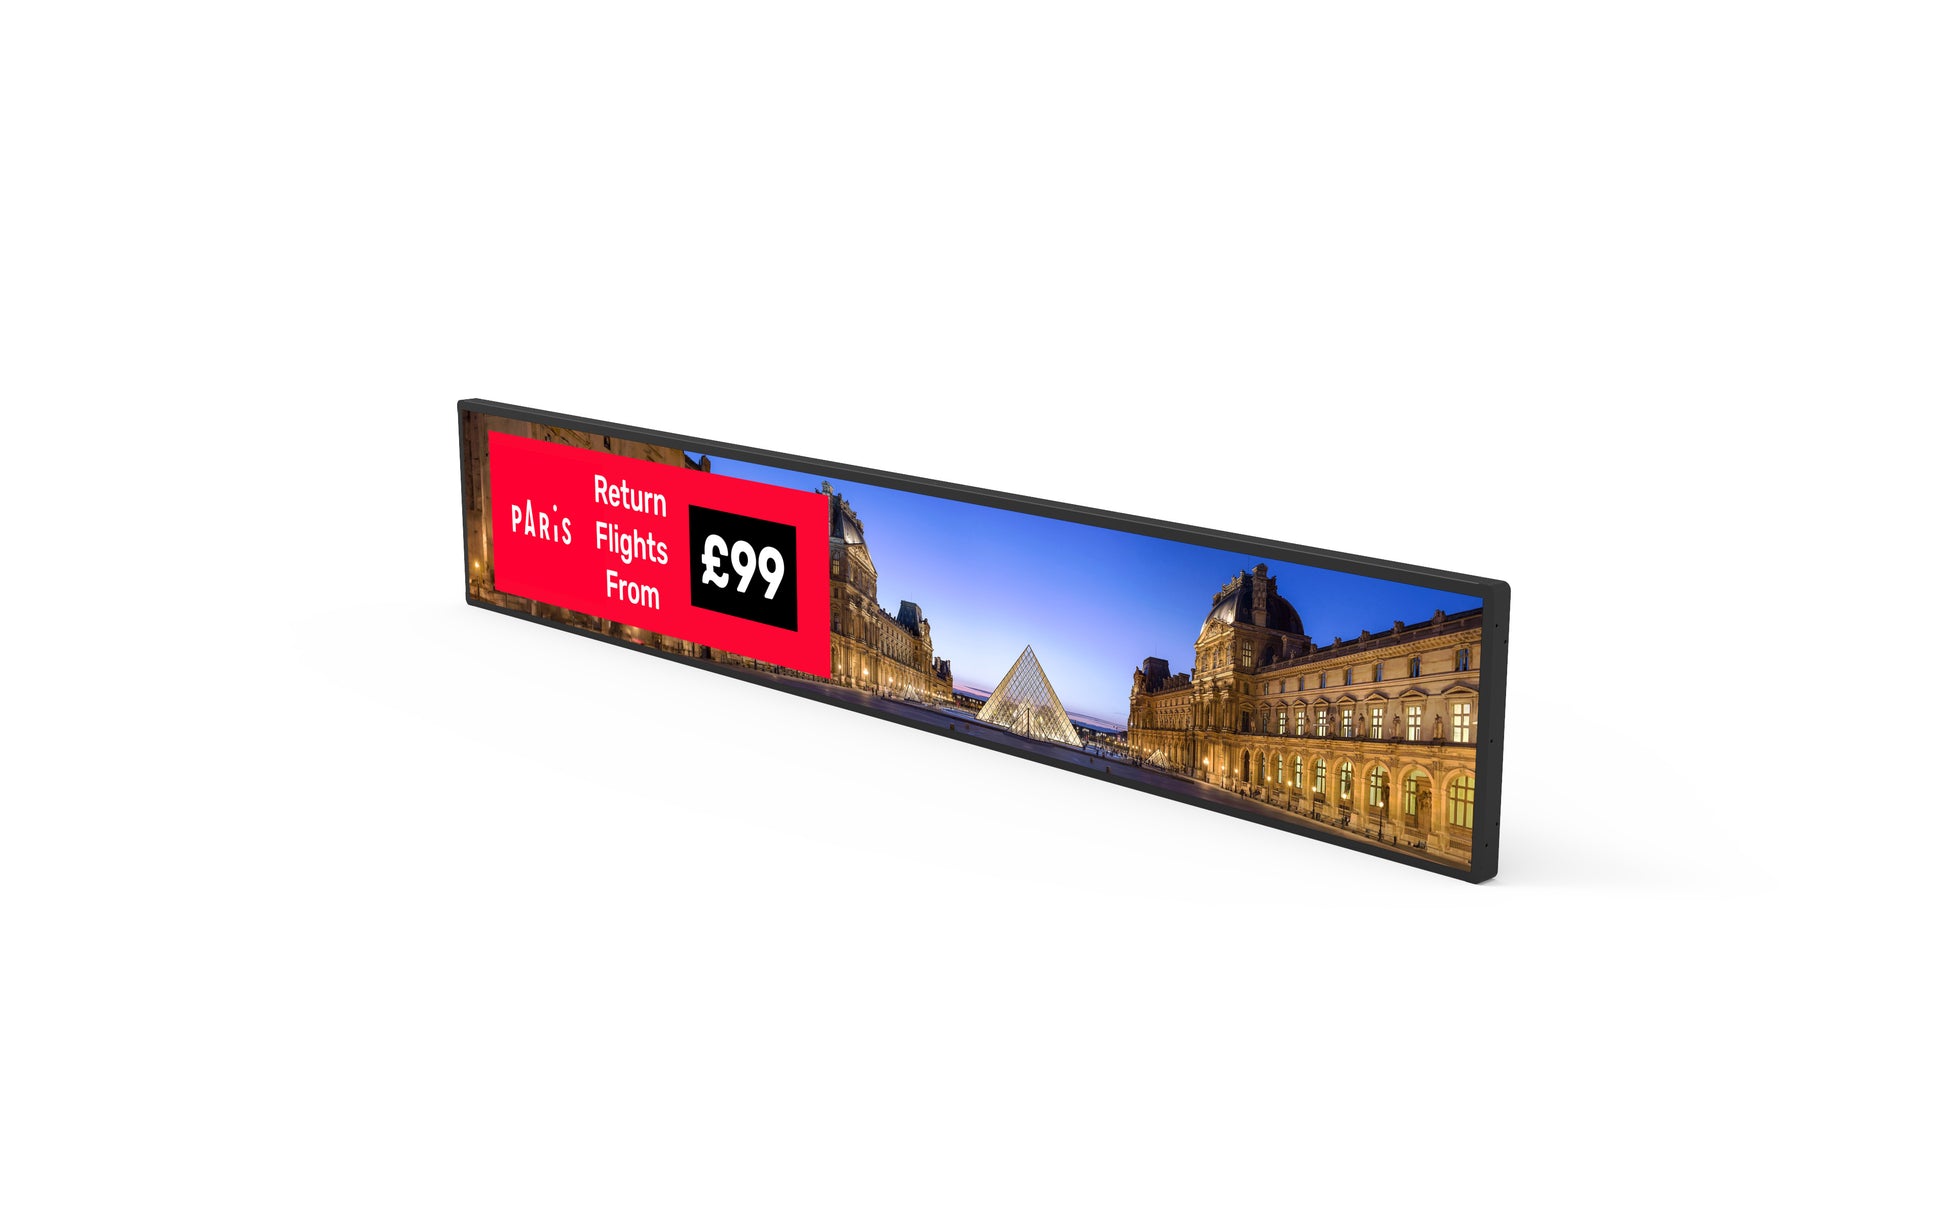 76" Ultra-wide stretched screen display